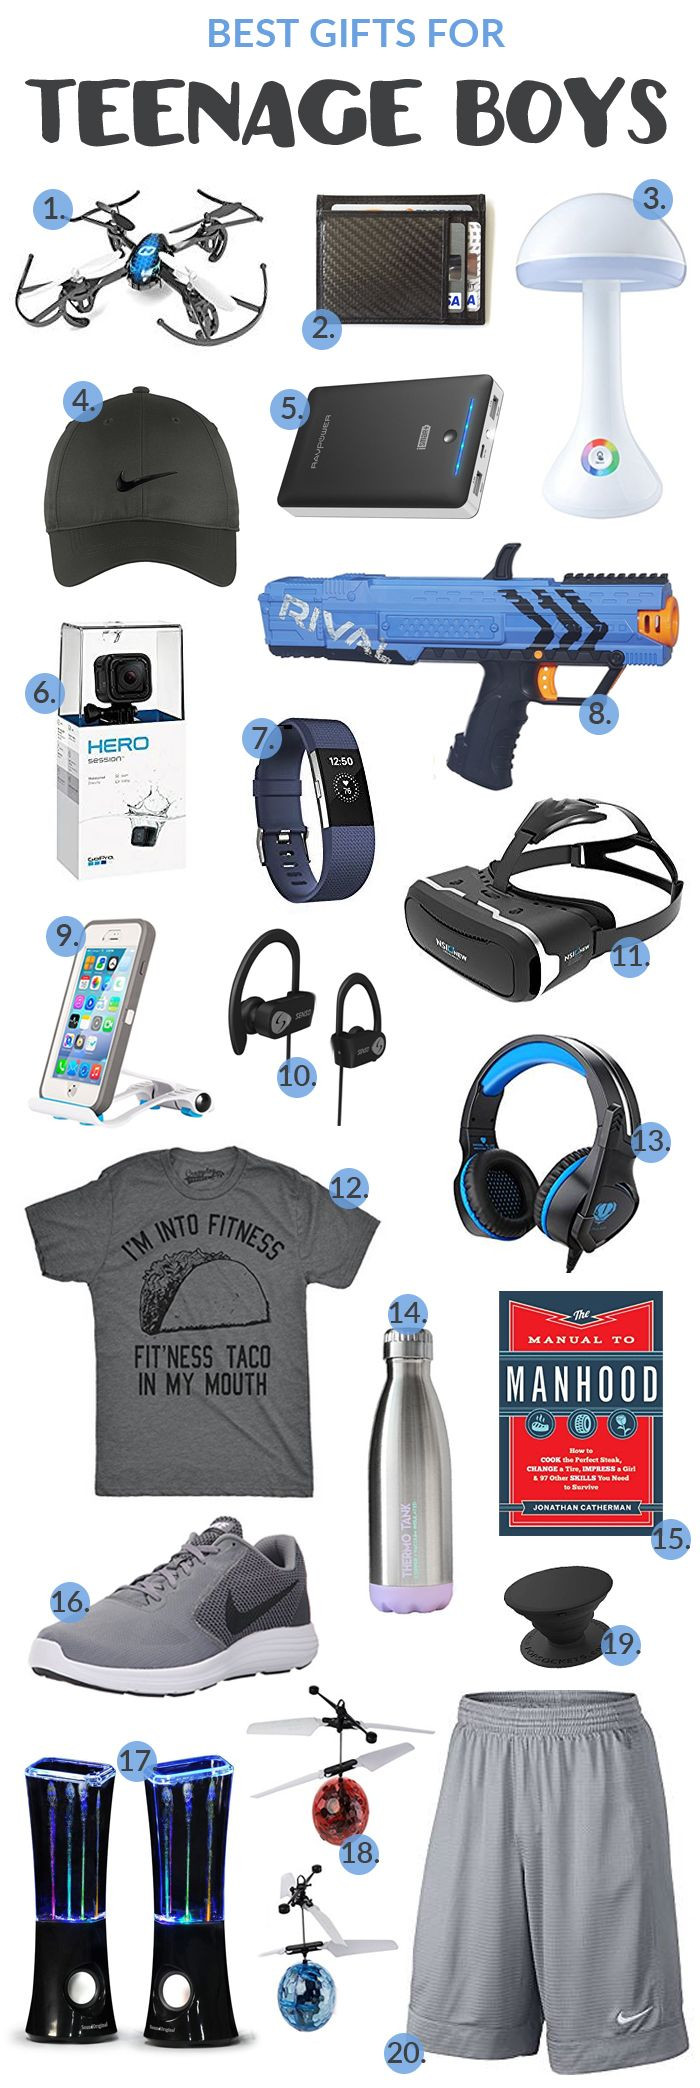 Great Gift Ideas For Teen Boys
 Best Gifts for Teenage Boys